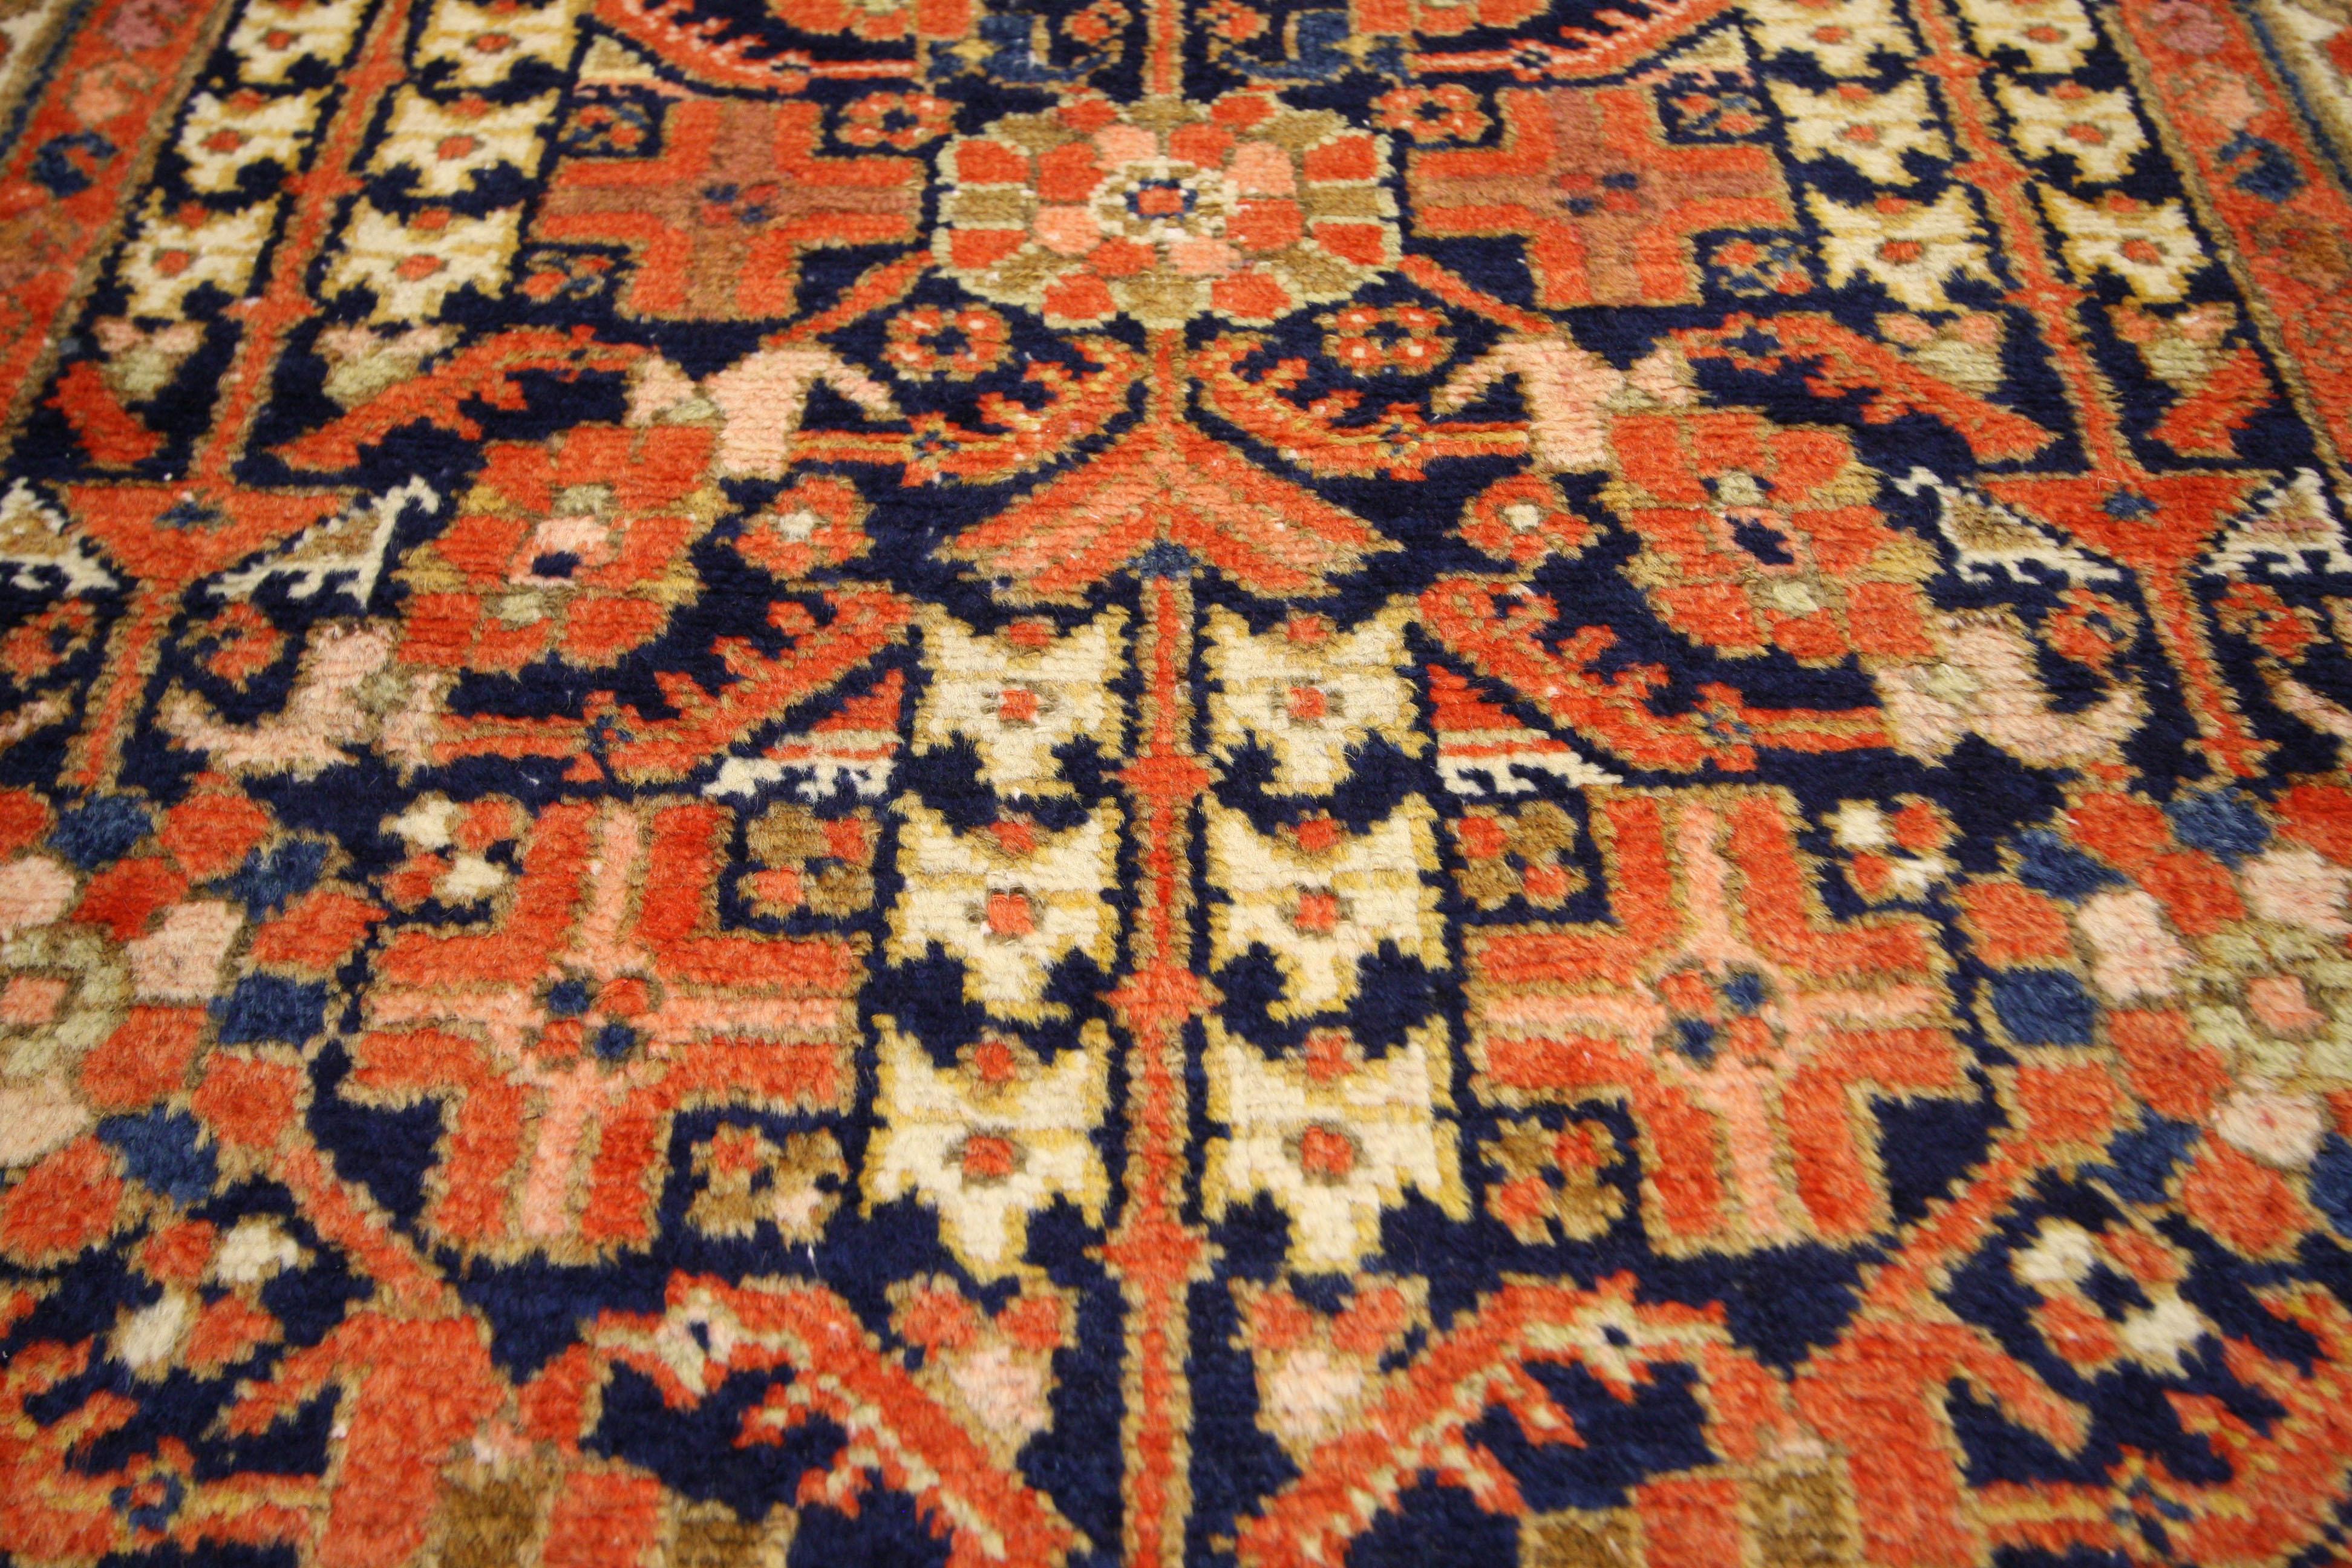 60232 Vintage Persian Malayer Runner with Guli Hinnai Flower, Modern Hallway Runner. Full of character and stately presence, this vintage Persian Malayer runner showcases an intrinsic geometric pattern highlighting the infamous Guli Henna which is